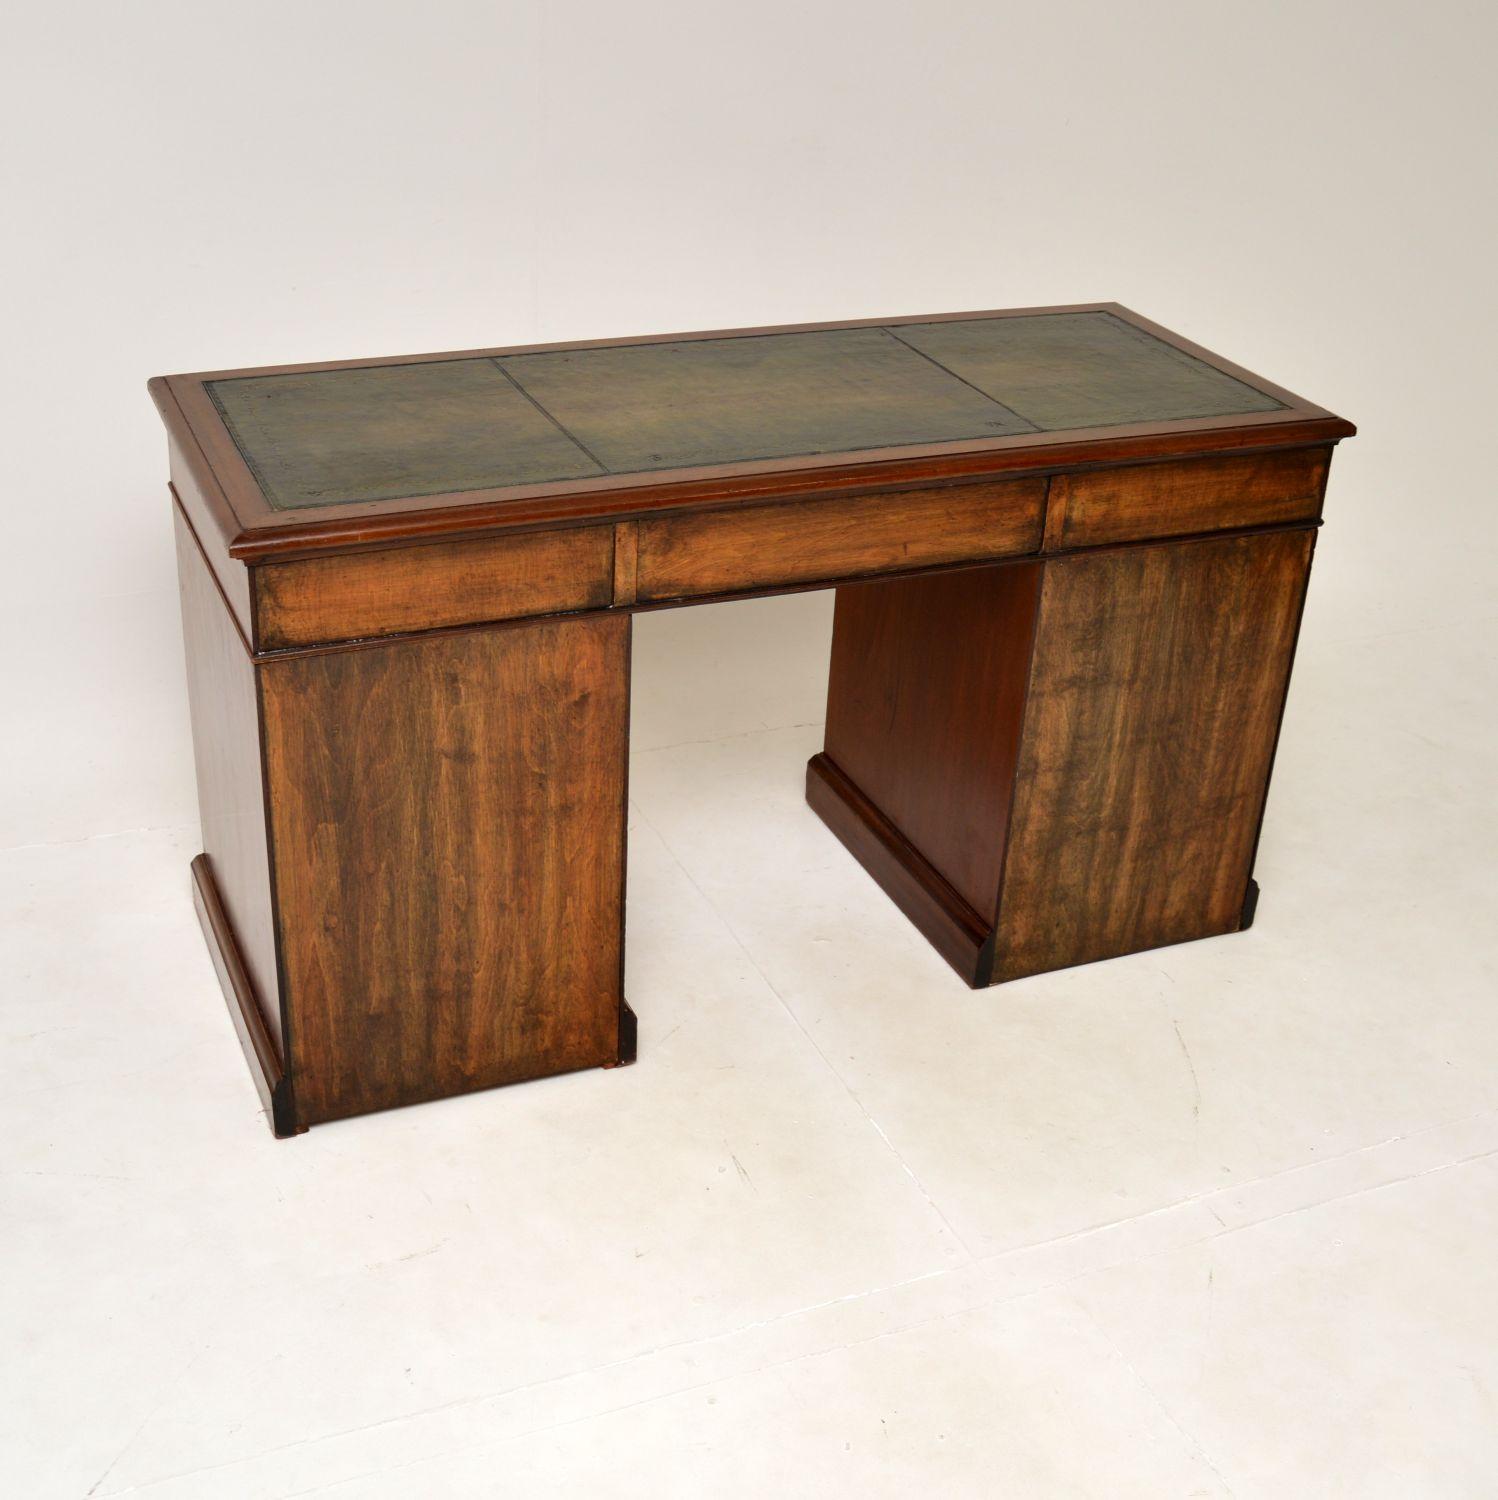 Antique Leather Top Pedestal Desk In Good Condition For Sale In London, GB